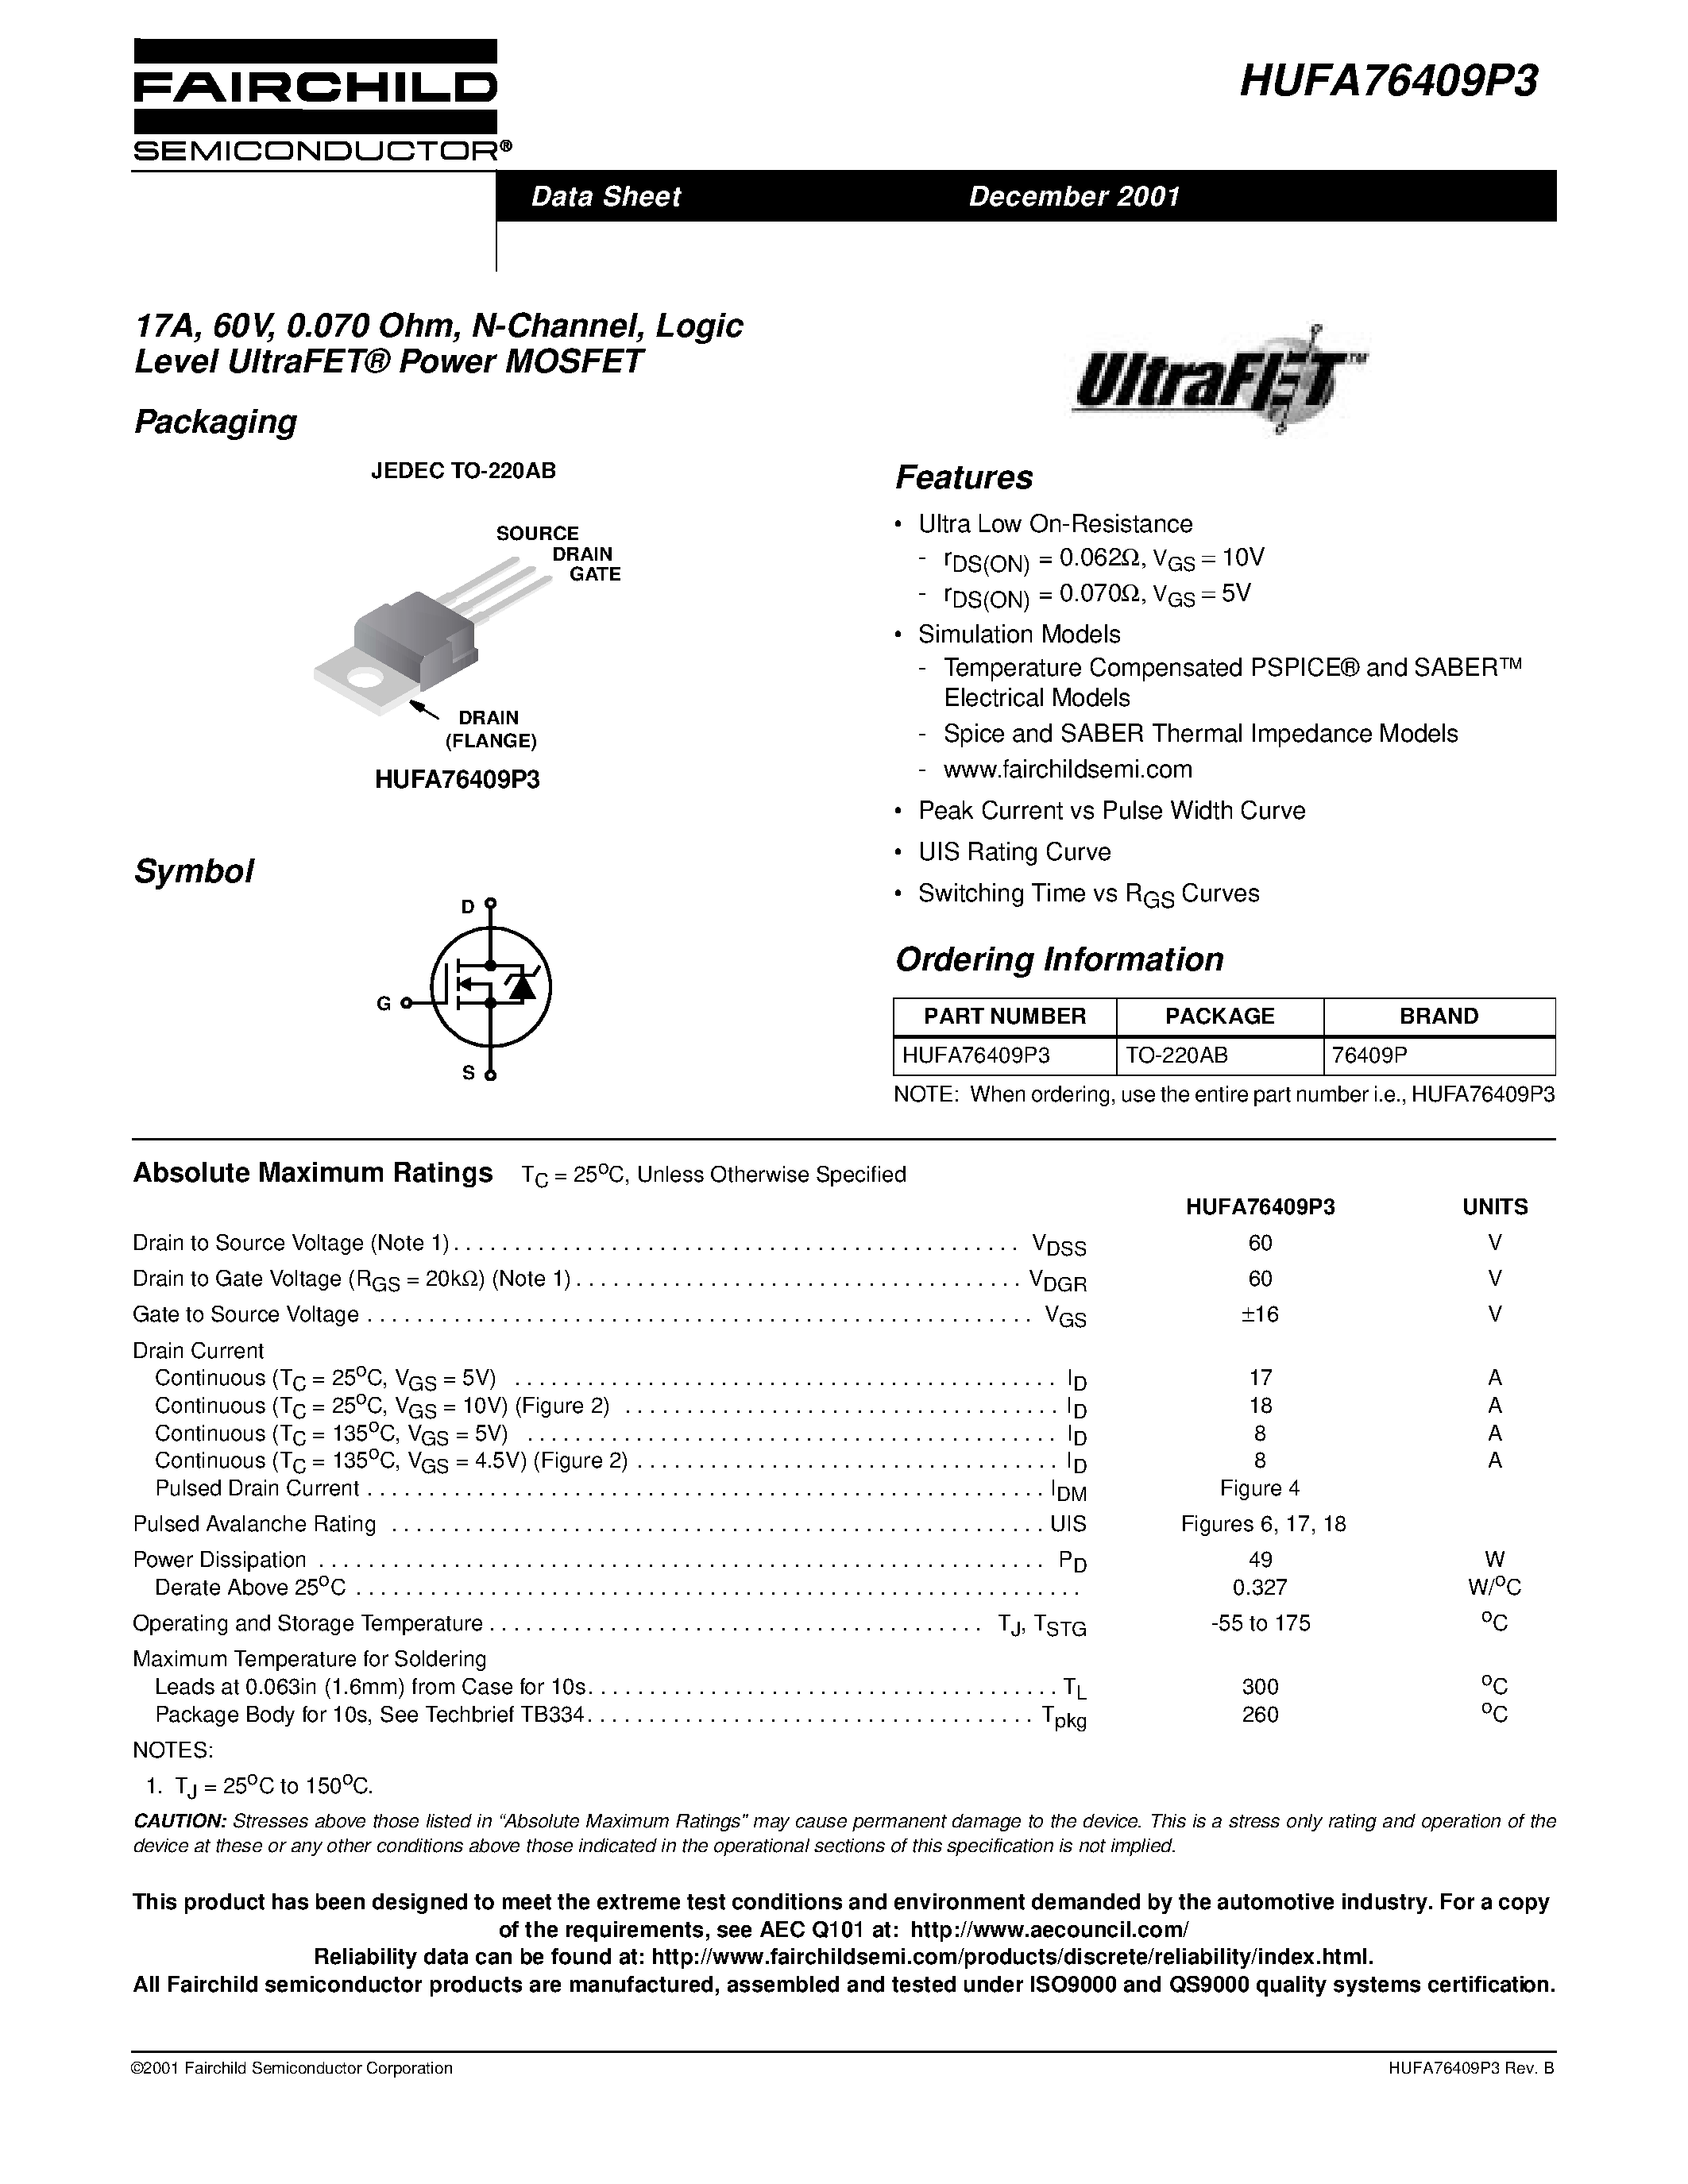 Datasheet HUFA76409P3 - 17A/ 60V/ 0.070 Ohm/ N-Channel/ Logic Level UltraFET Power MOSFET page 1